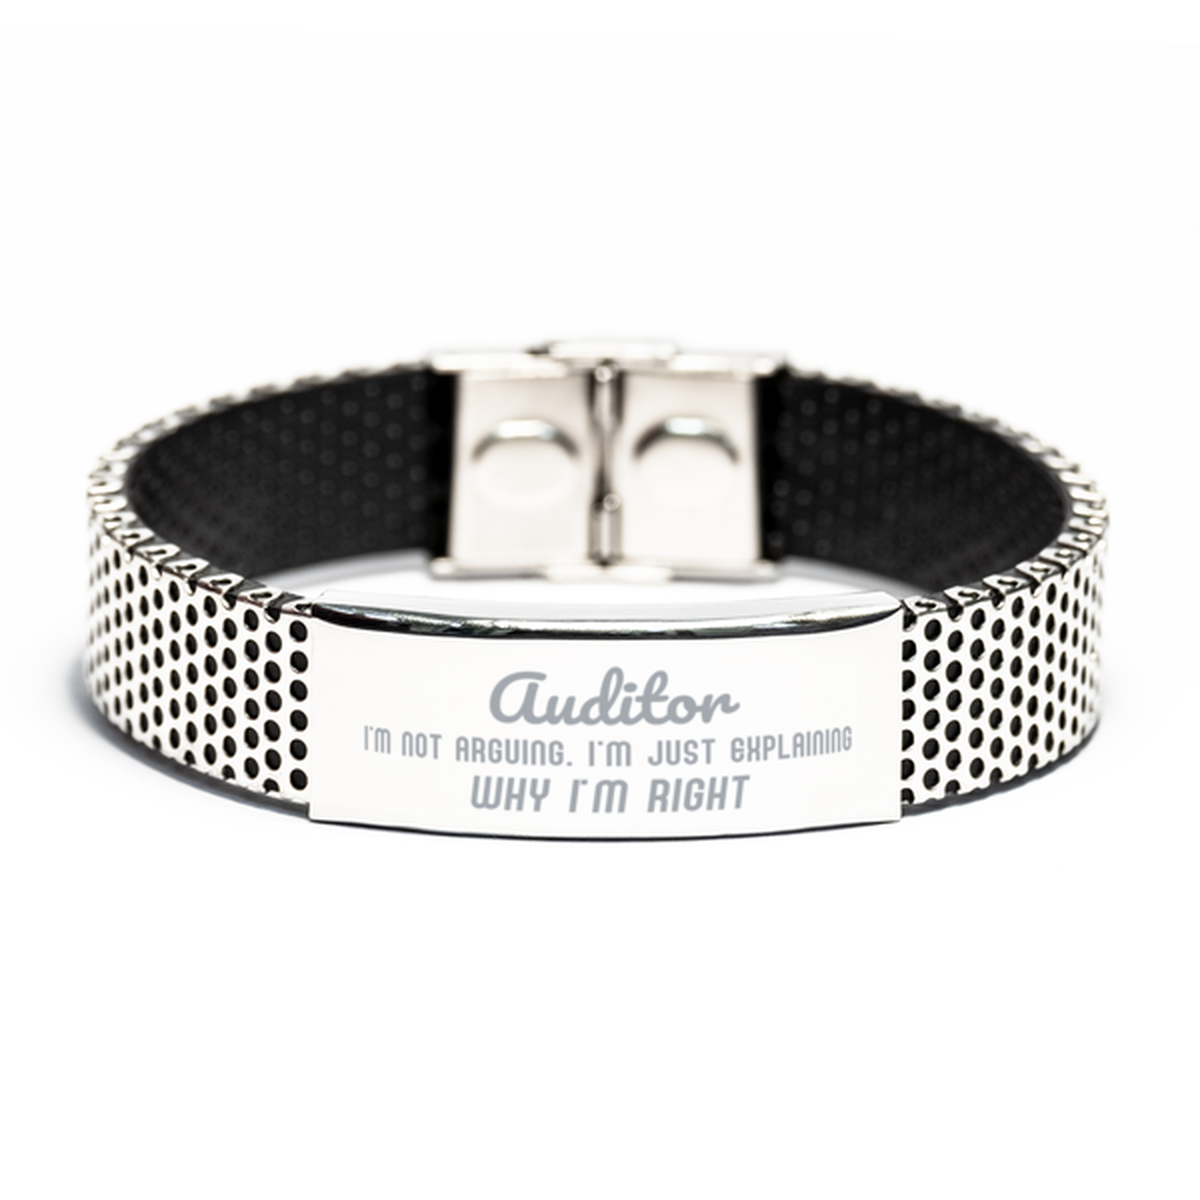 Auditor I'm not Arguing. I'm Just Explaining Why I'm RIGHT Stainless Steel Bracelet, Funny Saying Quote Auditor Gifts For Auditor Graduation Birthday Christmas Gifts for Men Women Coworker